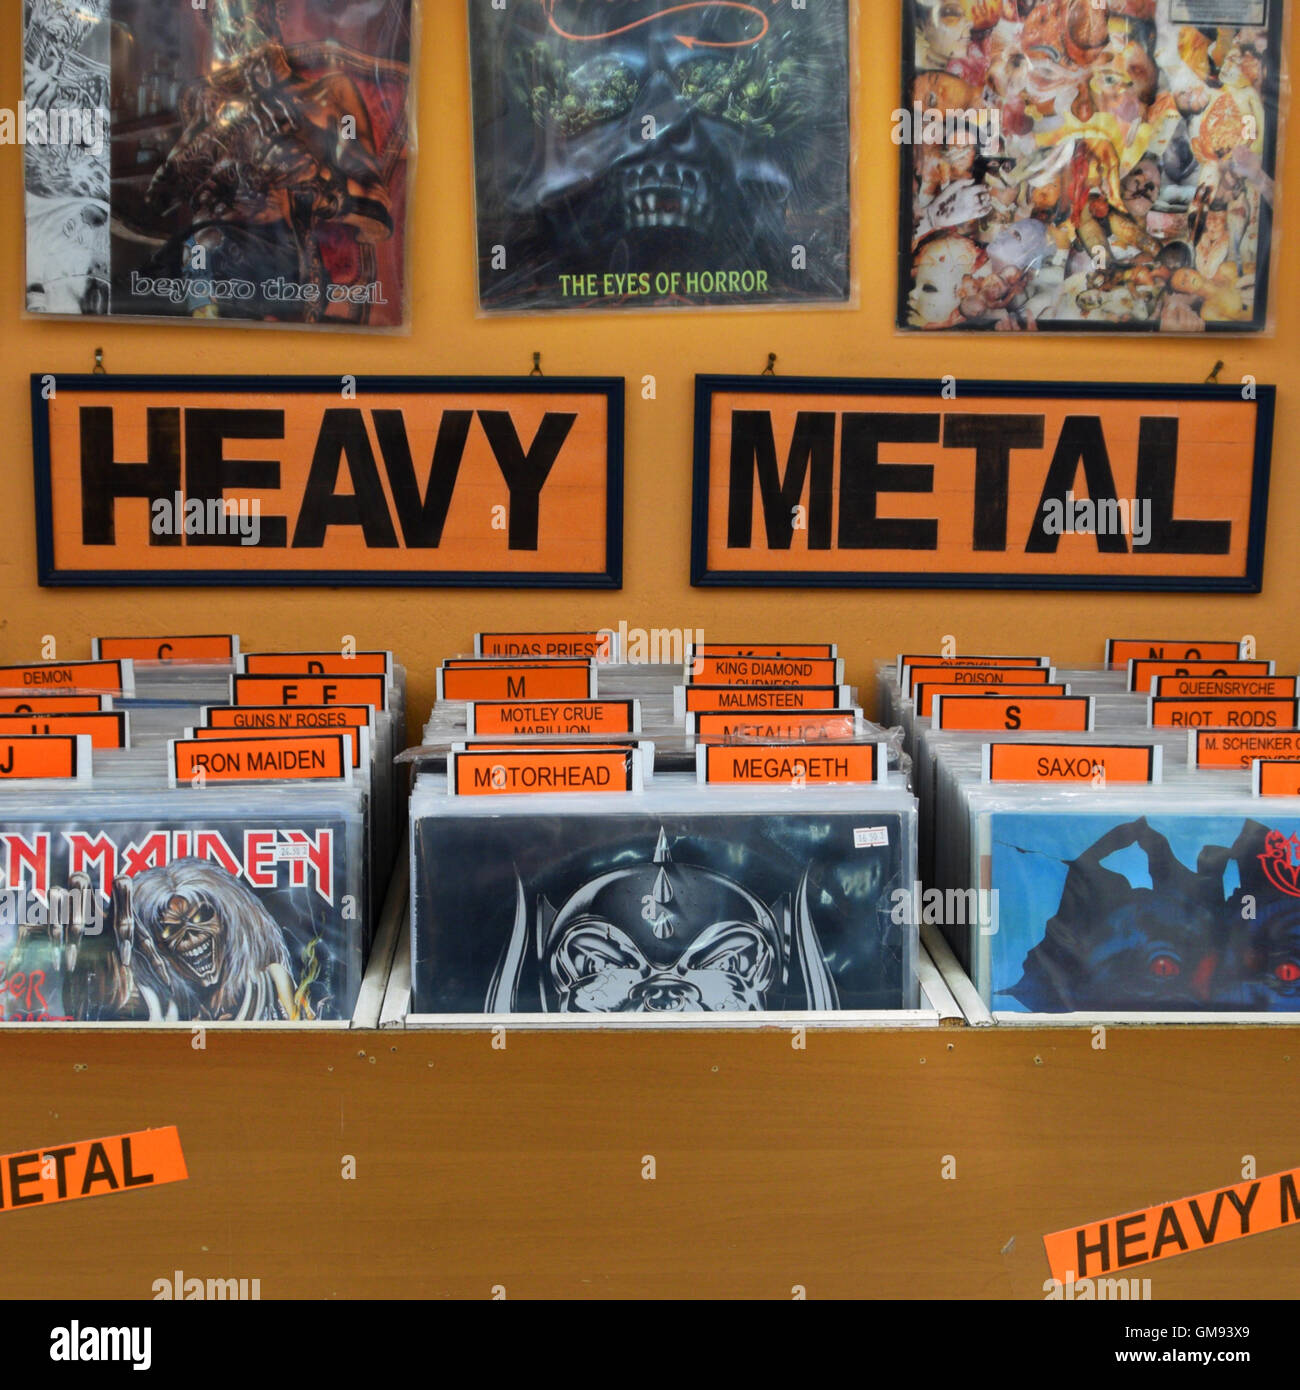 Heavy metal hard rock music vinyl records from the 1980s organized alphabetically and by popular bands. Stock Photo